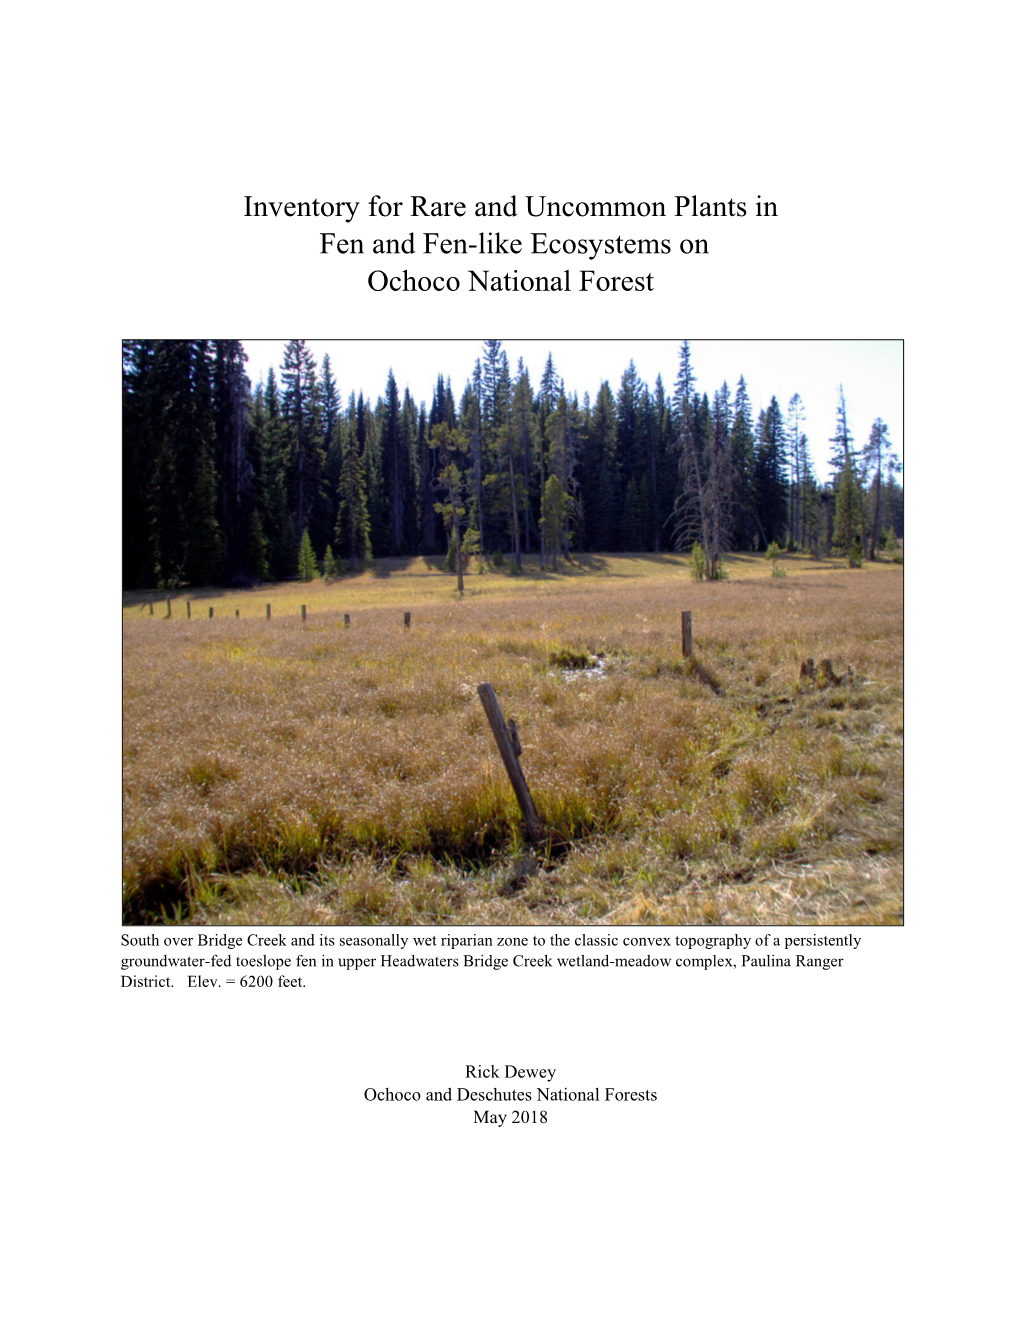 Inventory for Rare and Uncommon Plants in Fen and Fen-Like Ecosystems on Ochoco National Forest